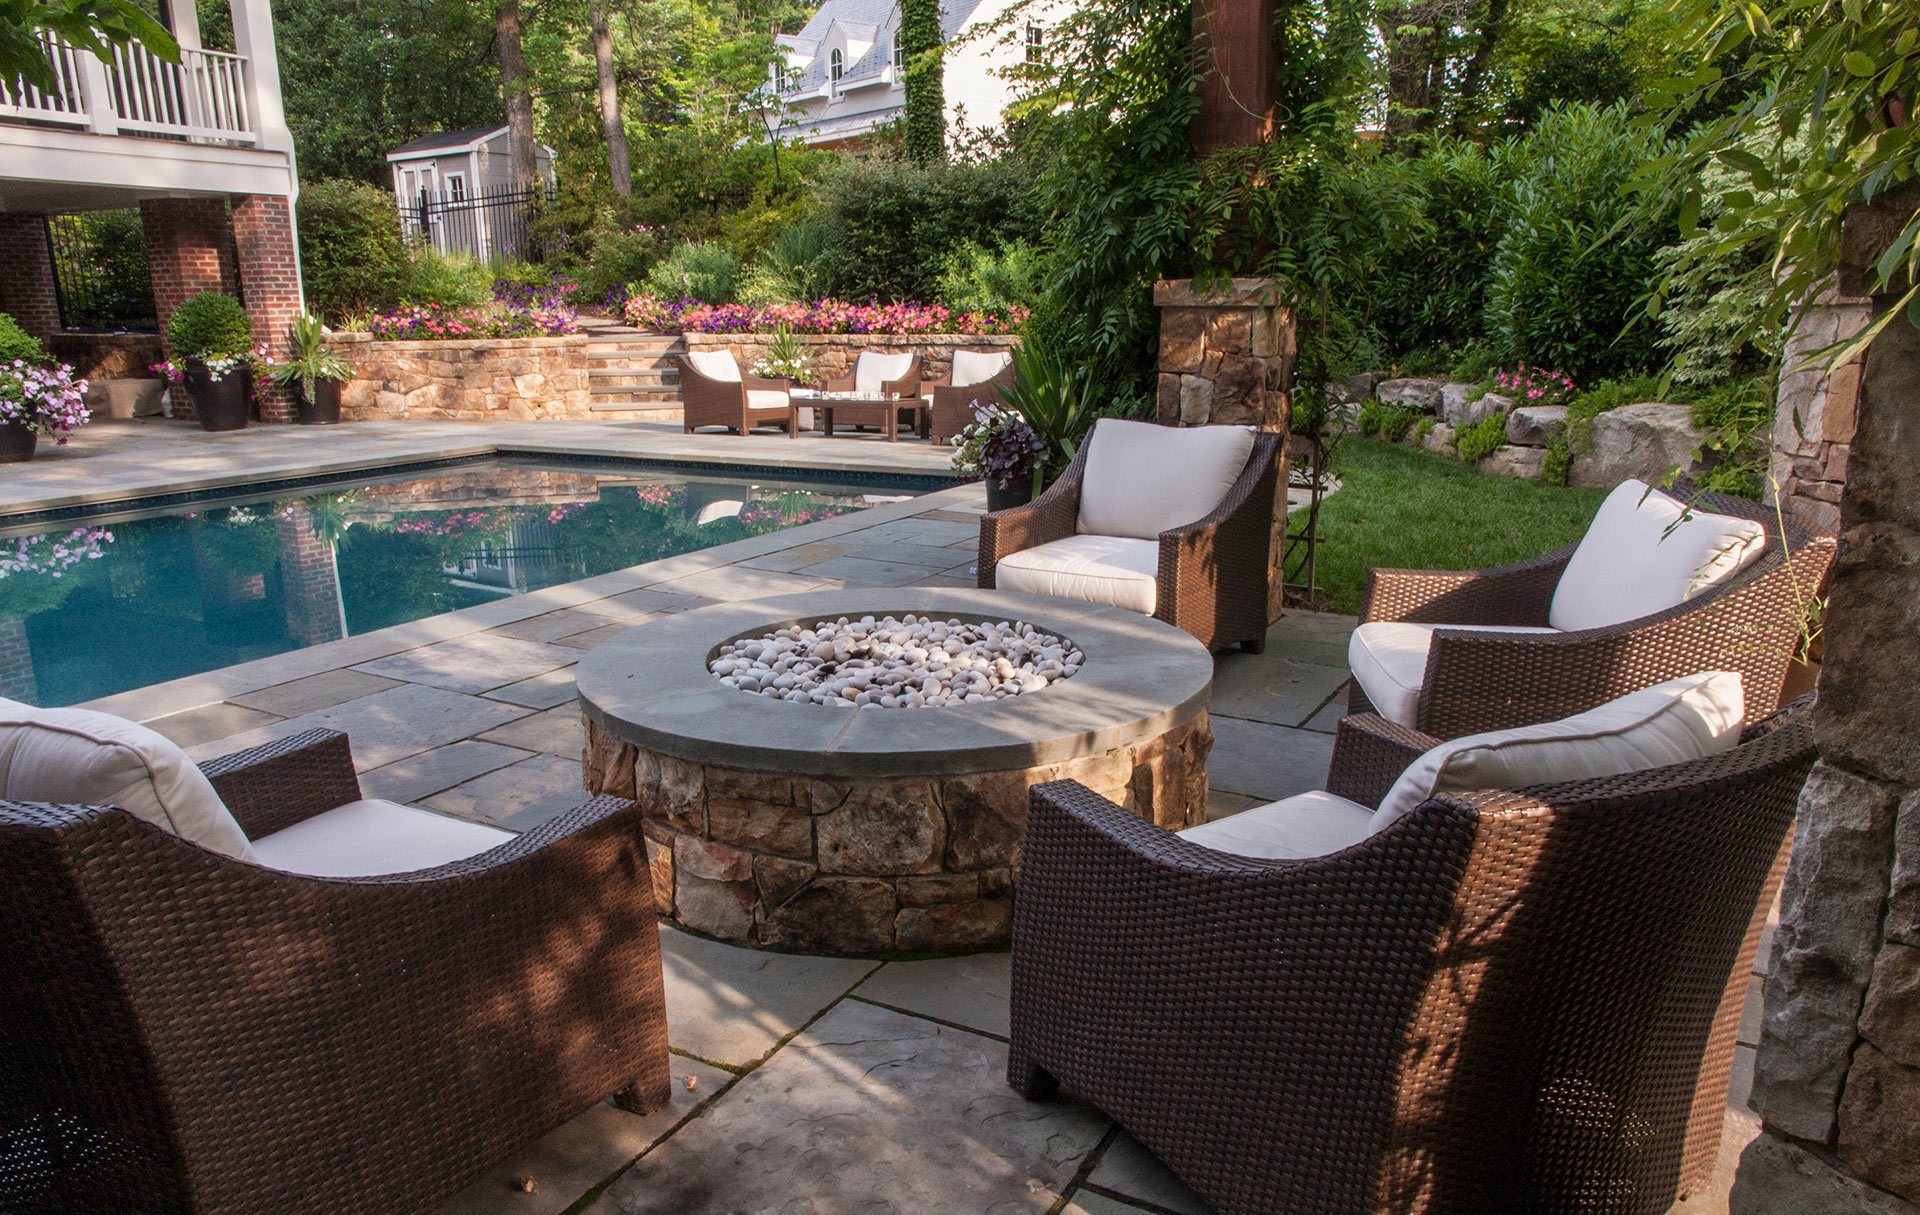 Patio in backyard with Outdoor Furniture, Fire Place, Outdoor Furniture, Pool, and Landscaping